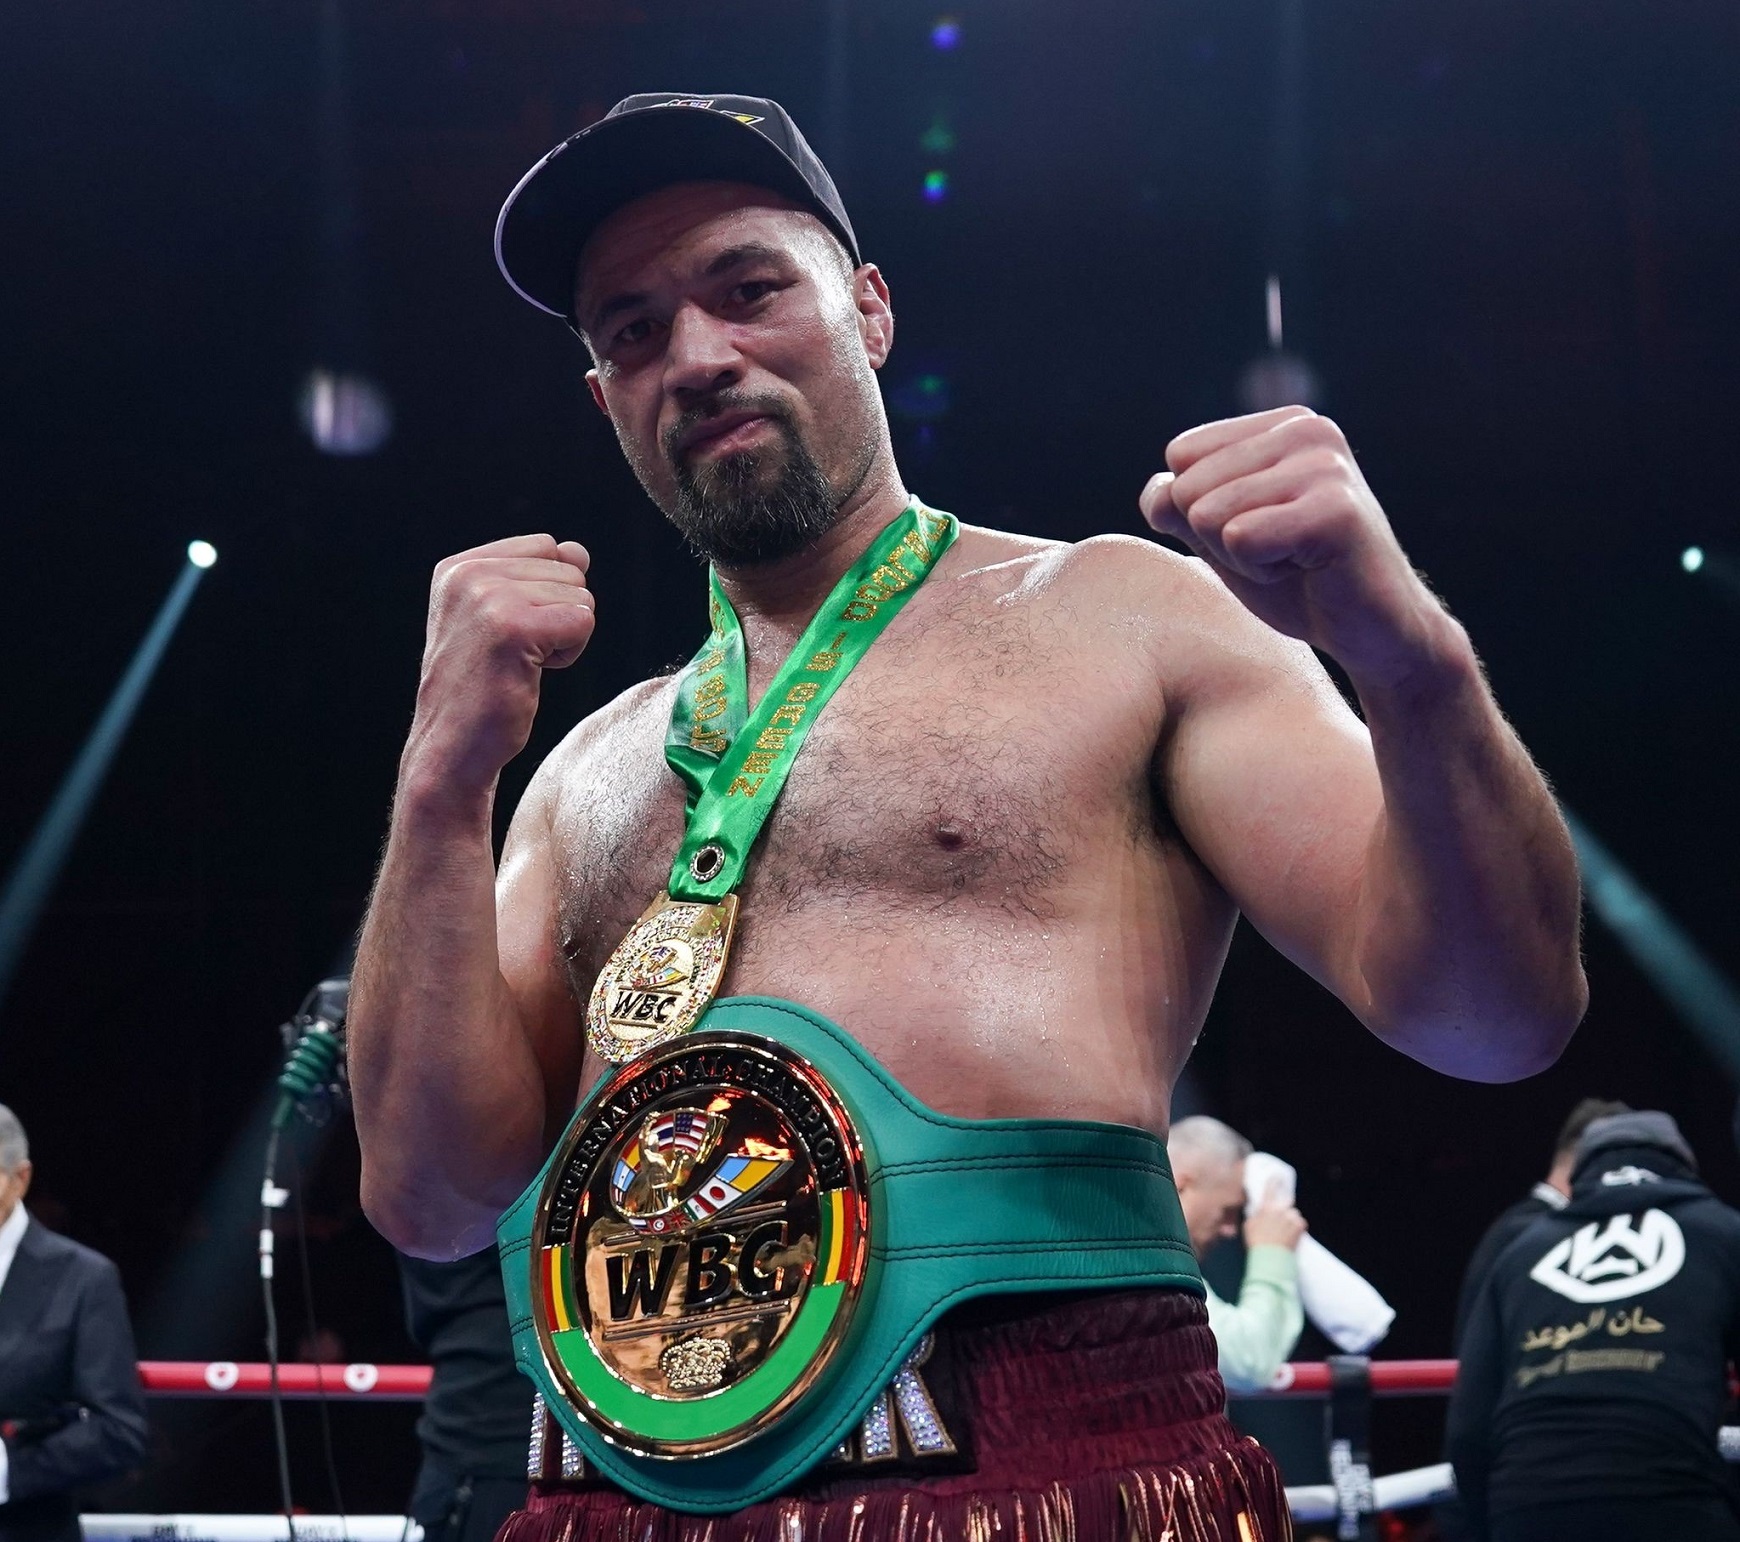 Heavyweight champion retires after last defeat to Joseph Parker